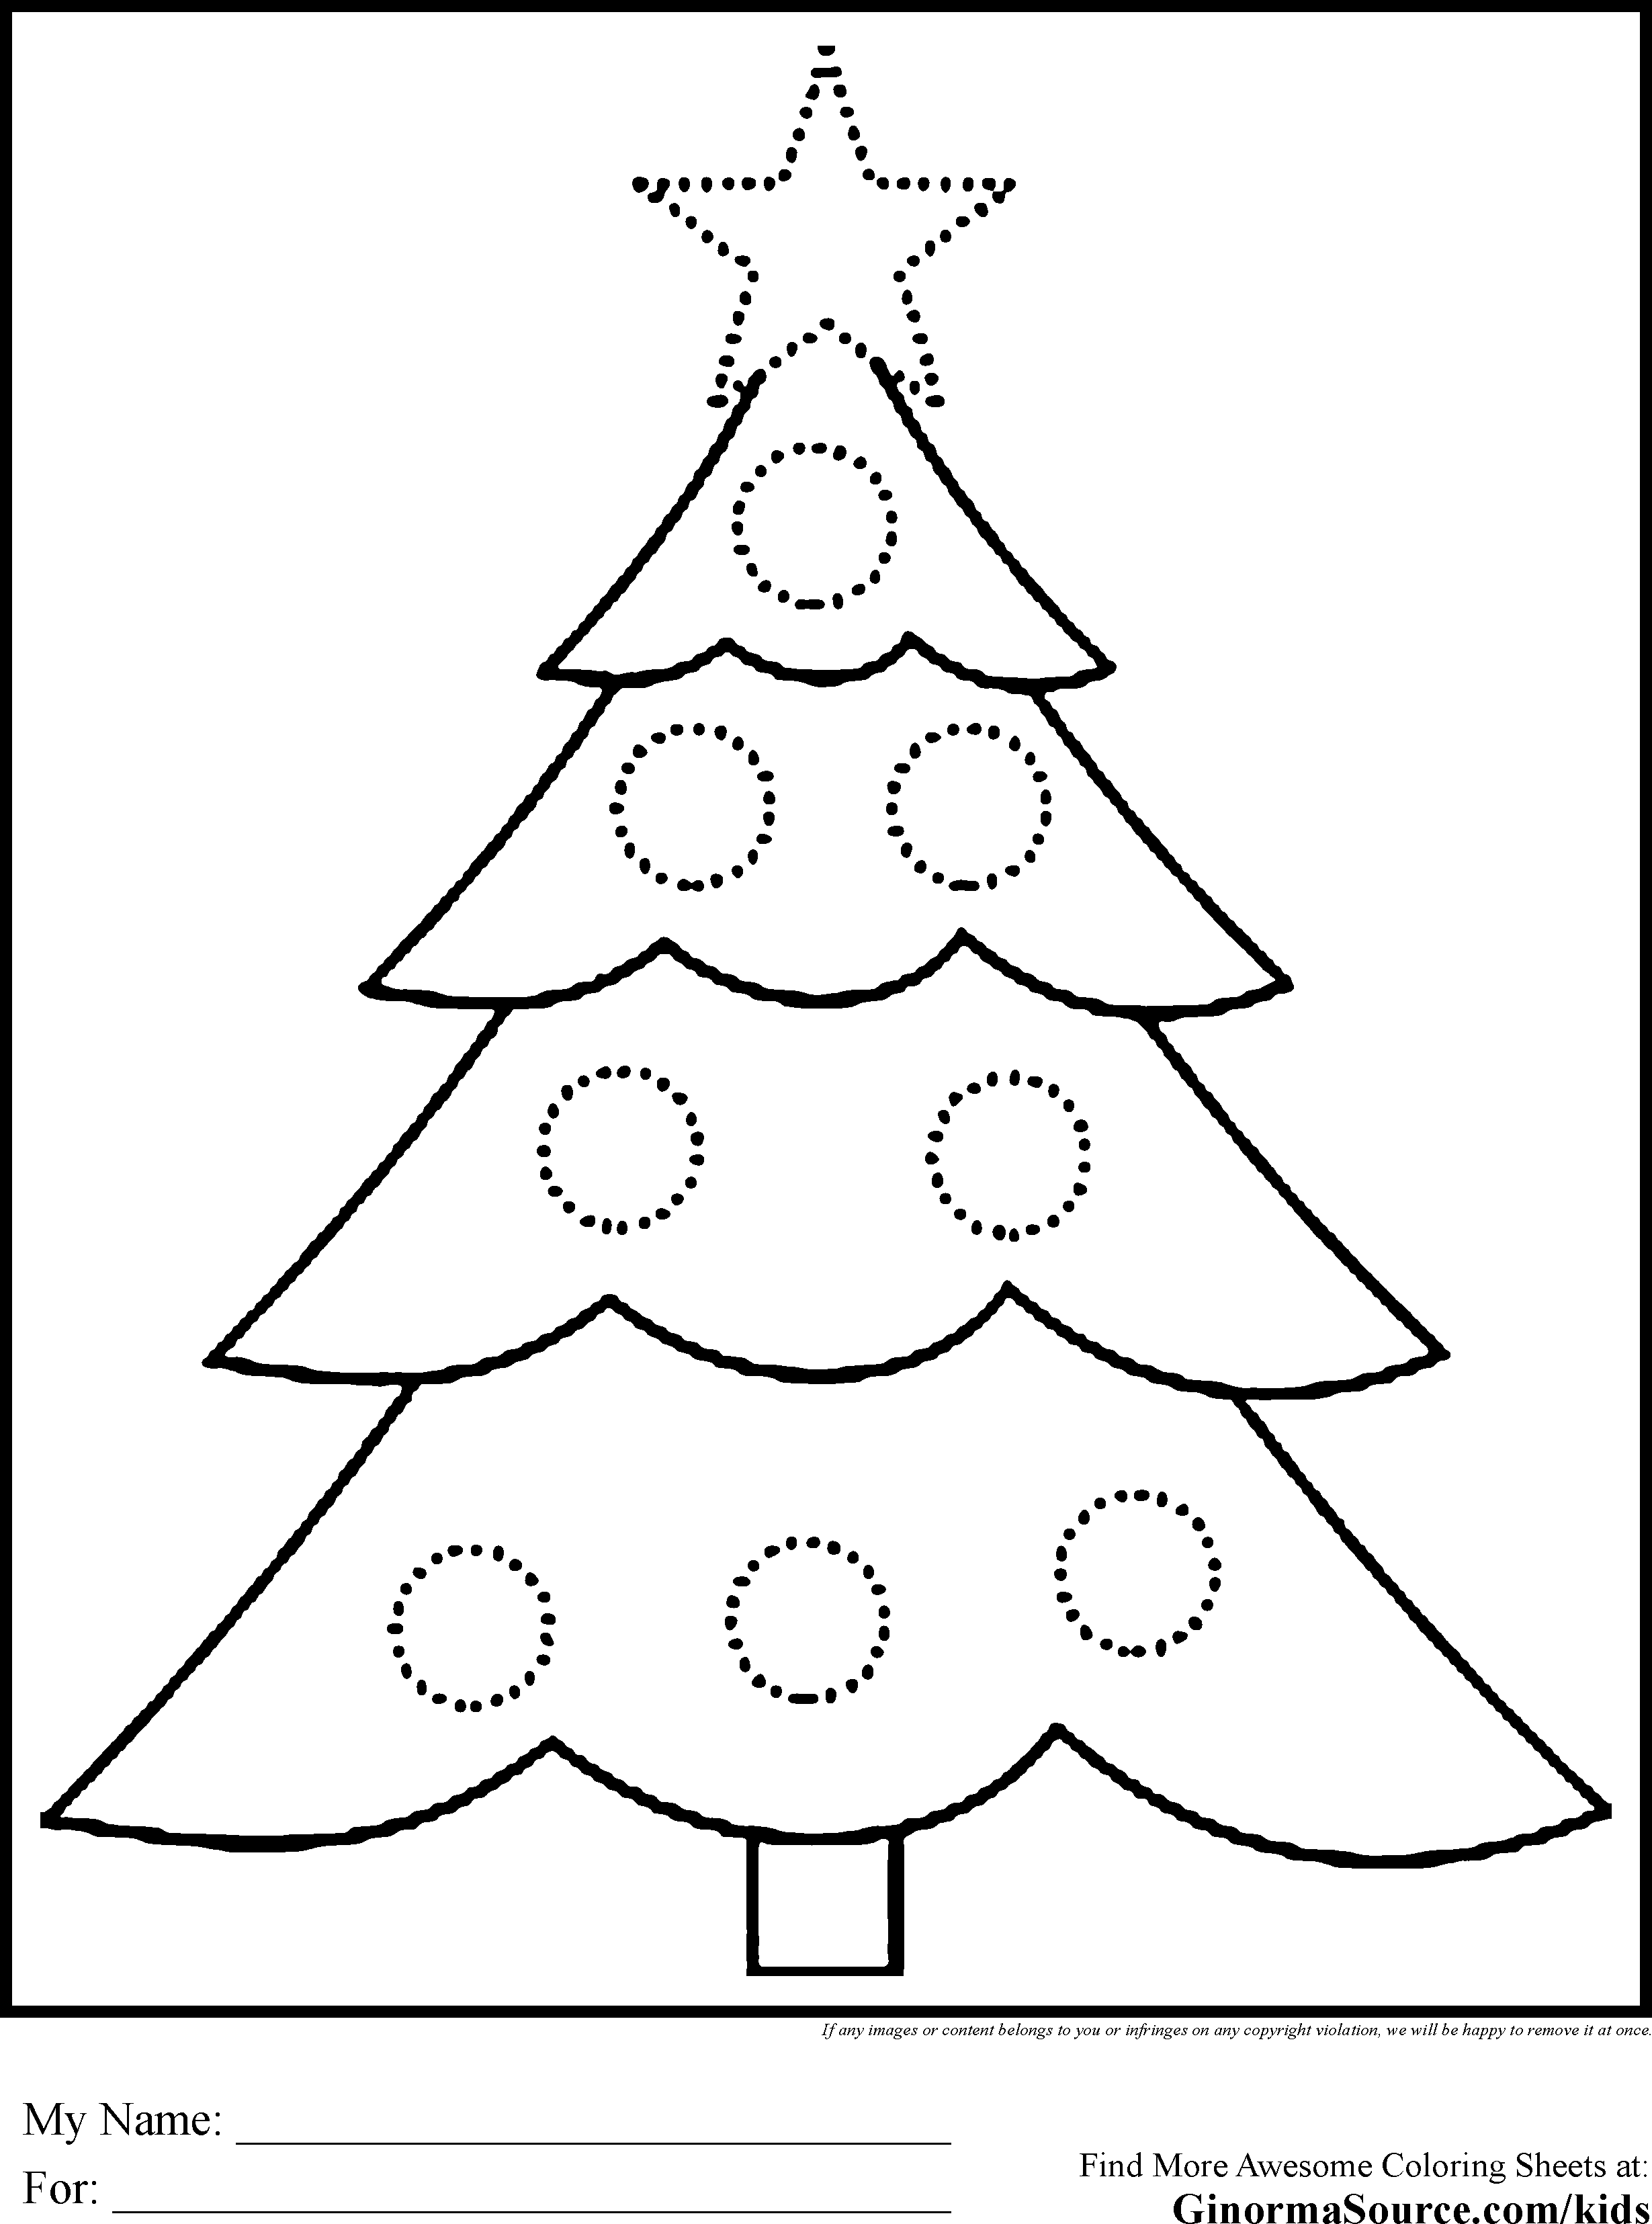 Christmas tree coloring pages - coloring book - #33